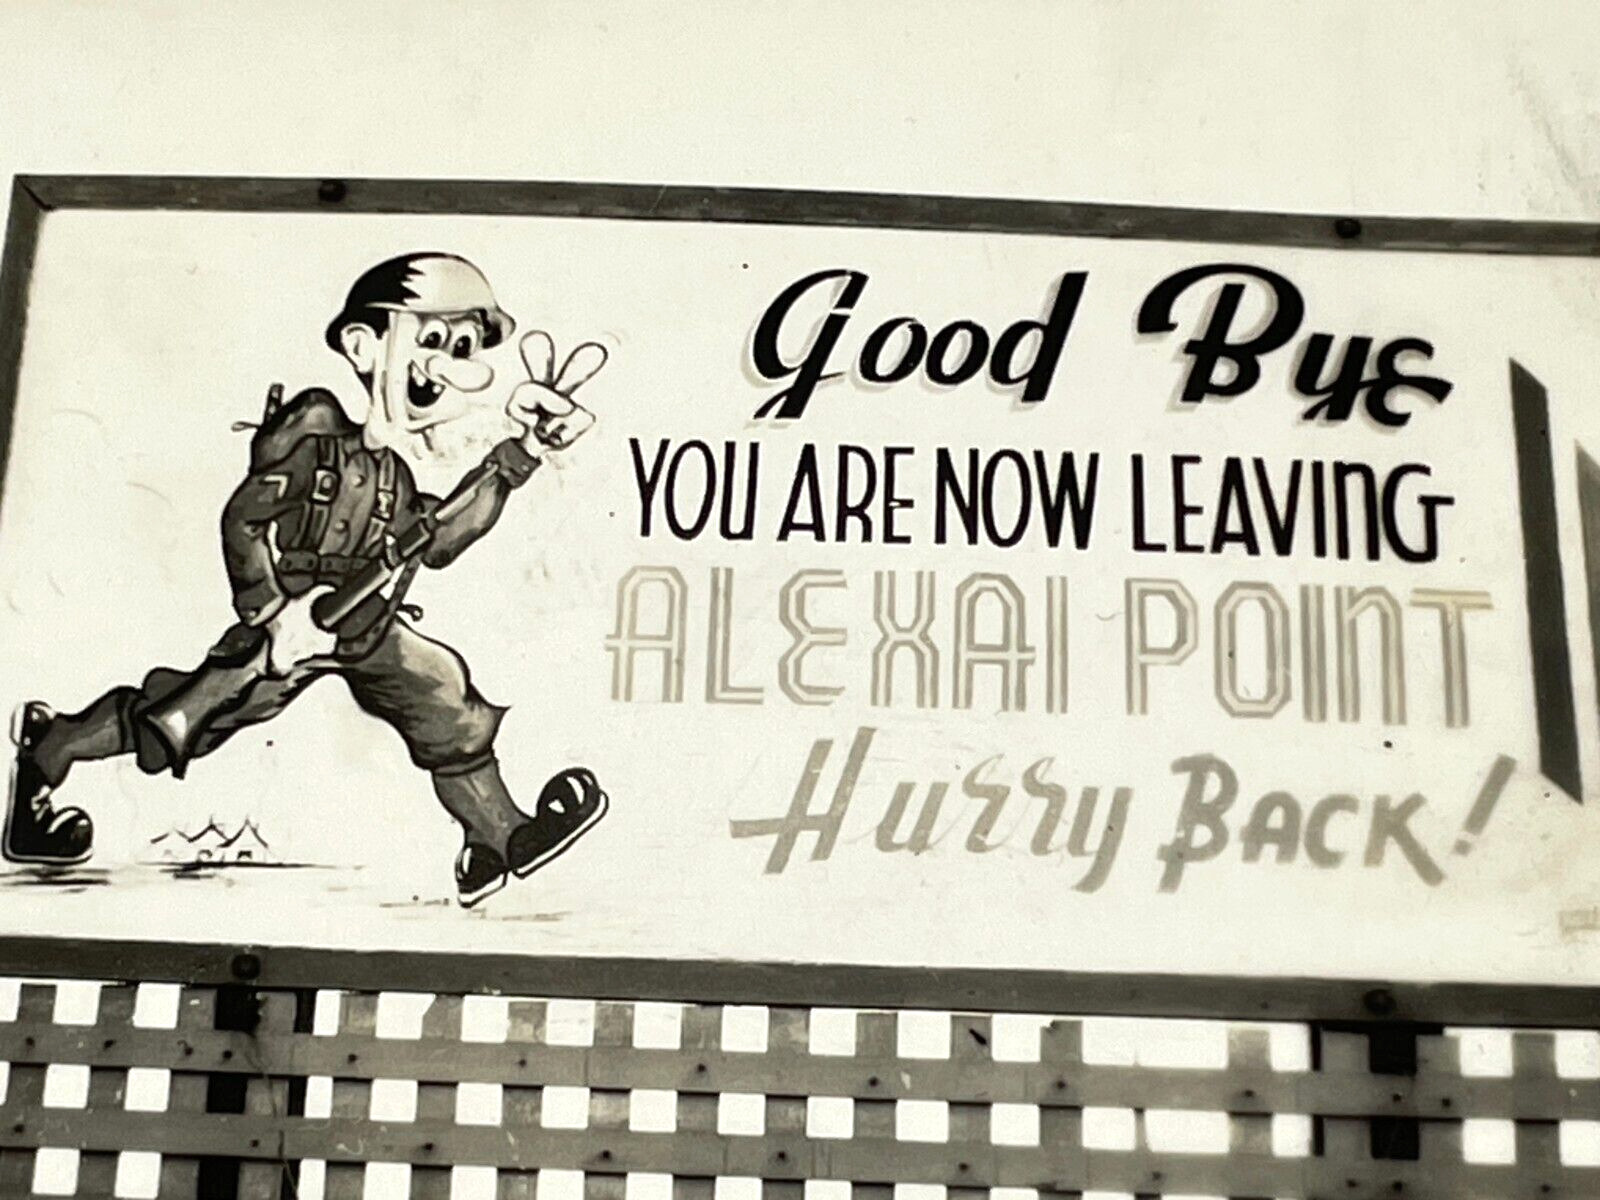 Zi Photo Road Sign GOOD BYE Youn Are Now Leaving Alexai Point Hurry Back 1940's